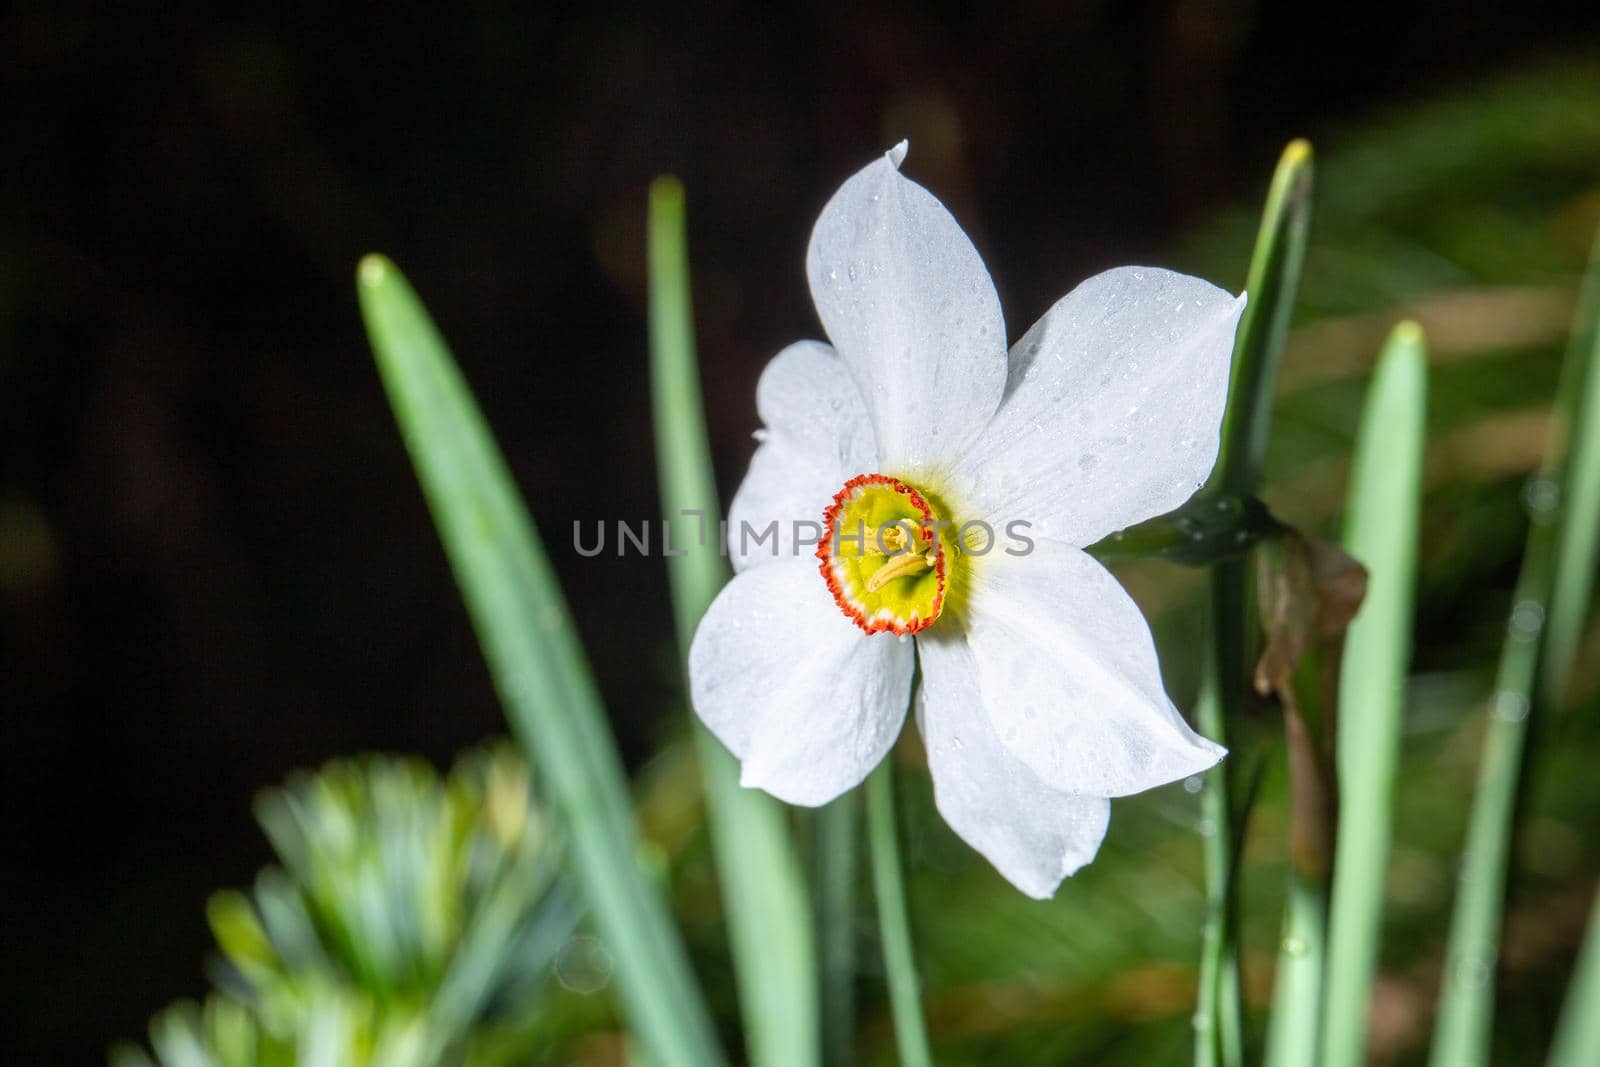 Celebration of life, white narcissus in spring over blurred nature background. Close-up front view